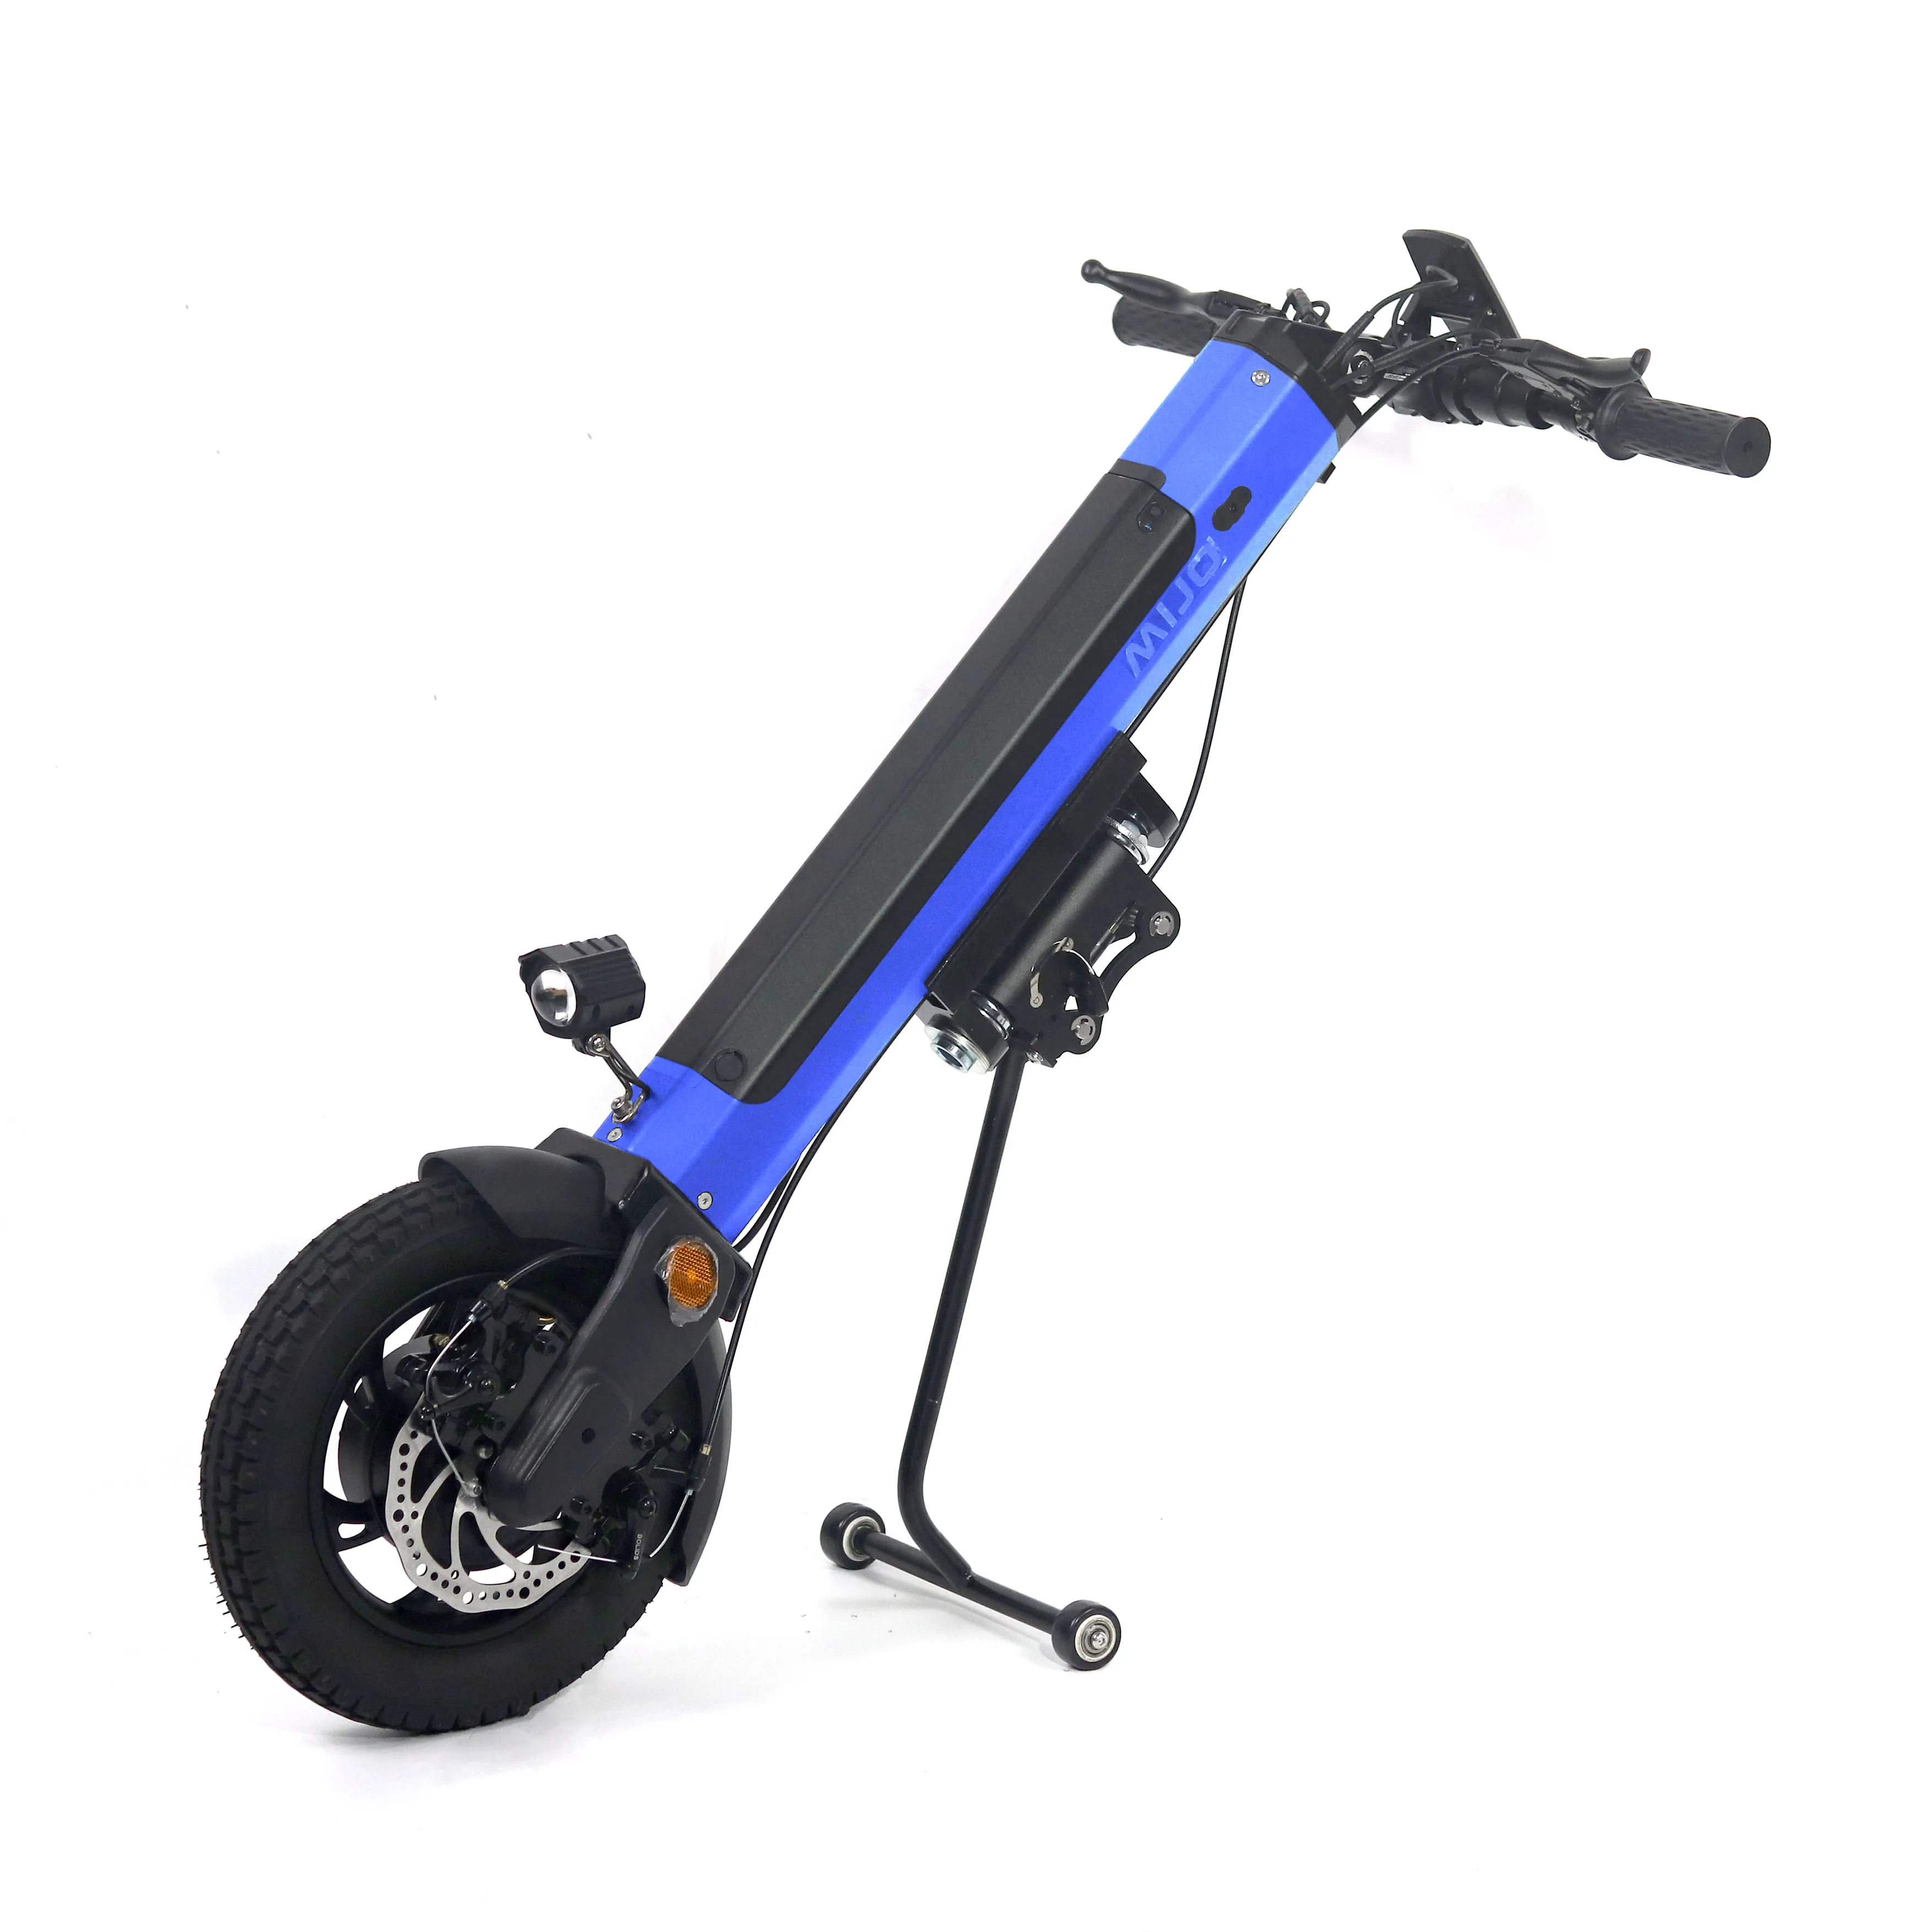 Portable and Comfortable Electric Handcycle Wheelchair Attachment 350W Wheelchair Drive Head with 36V 13Ah Lithium battery samebike 20lvxd30 ii electric bike 48v 350w 10ah battery max speed 25km h